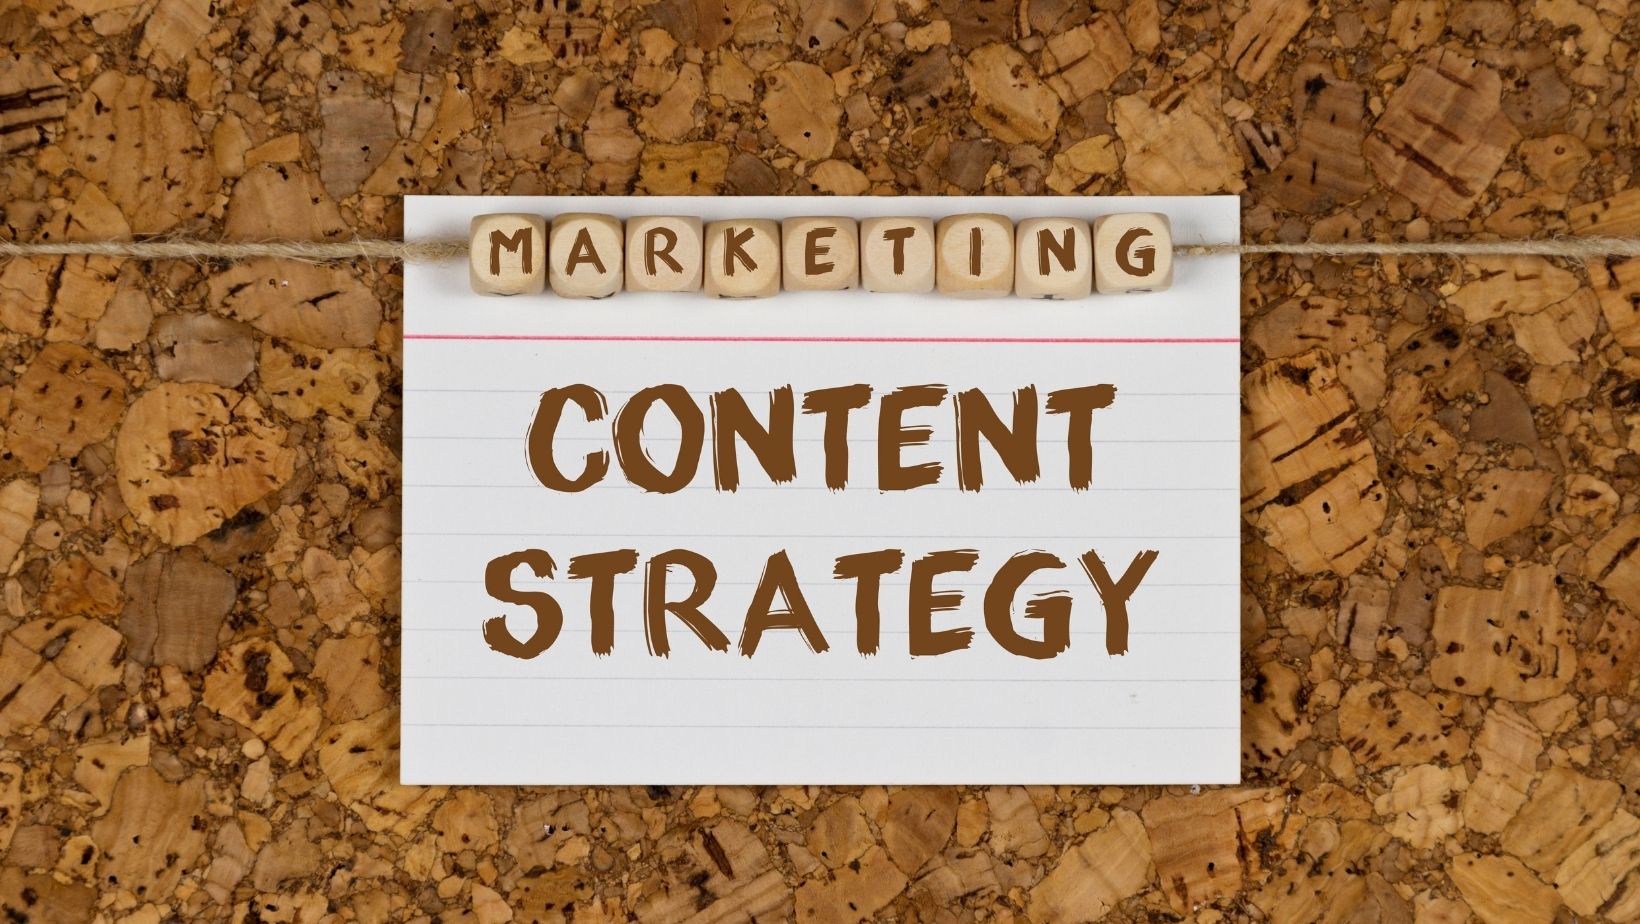 In this blog post, we will discuss how content buckets can help you create engaging, quality content in less time.